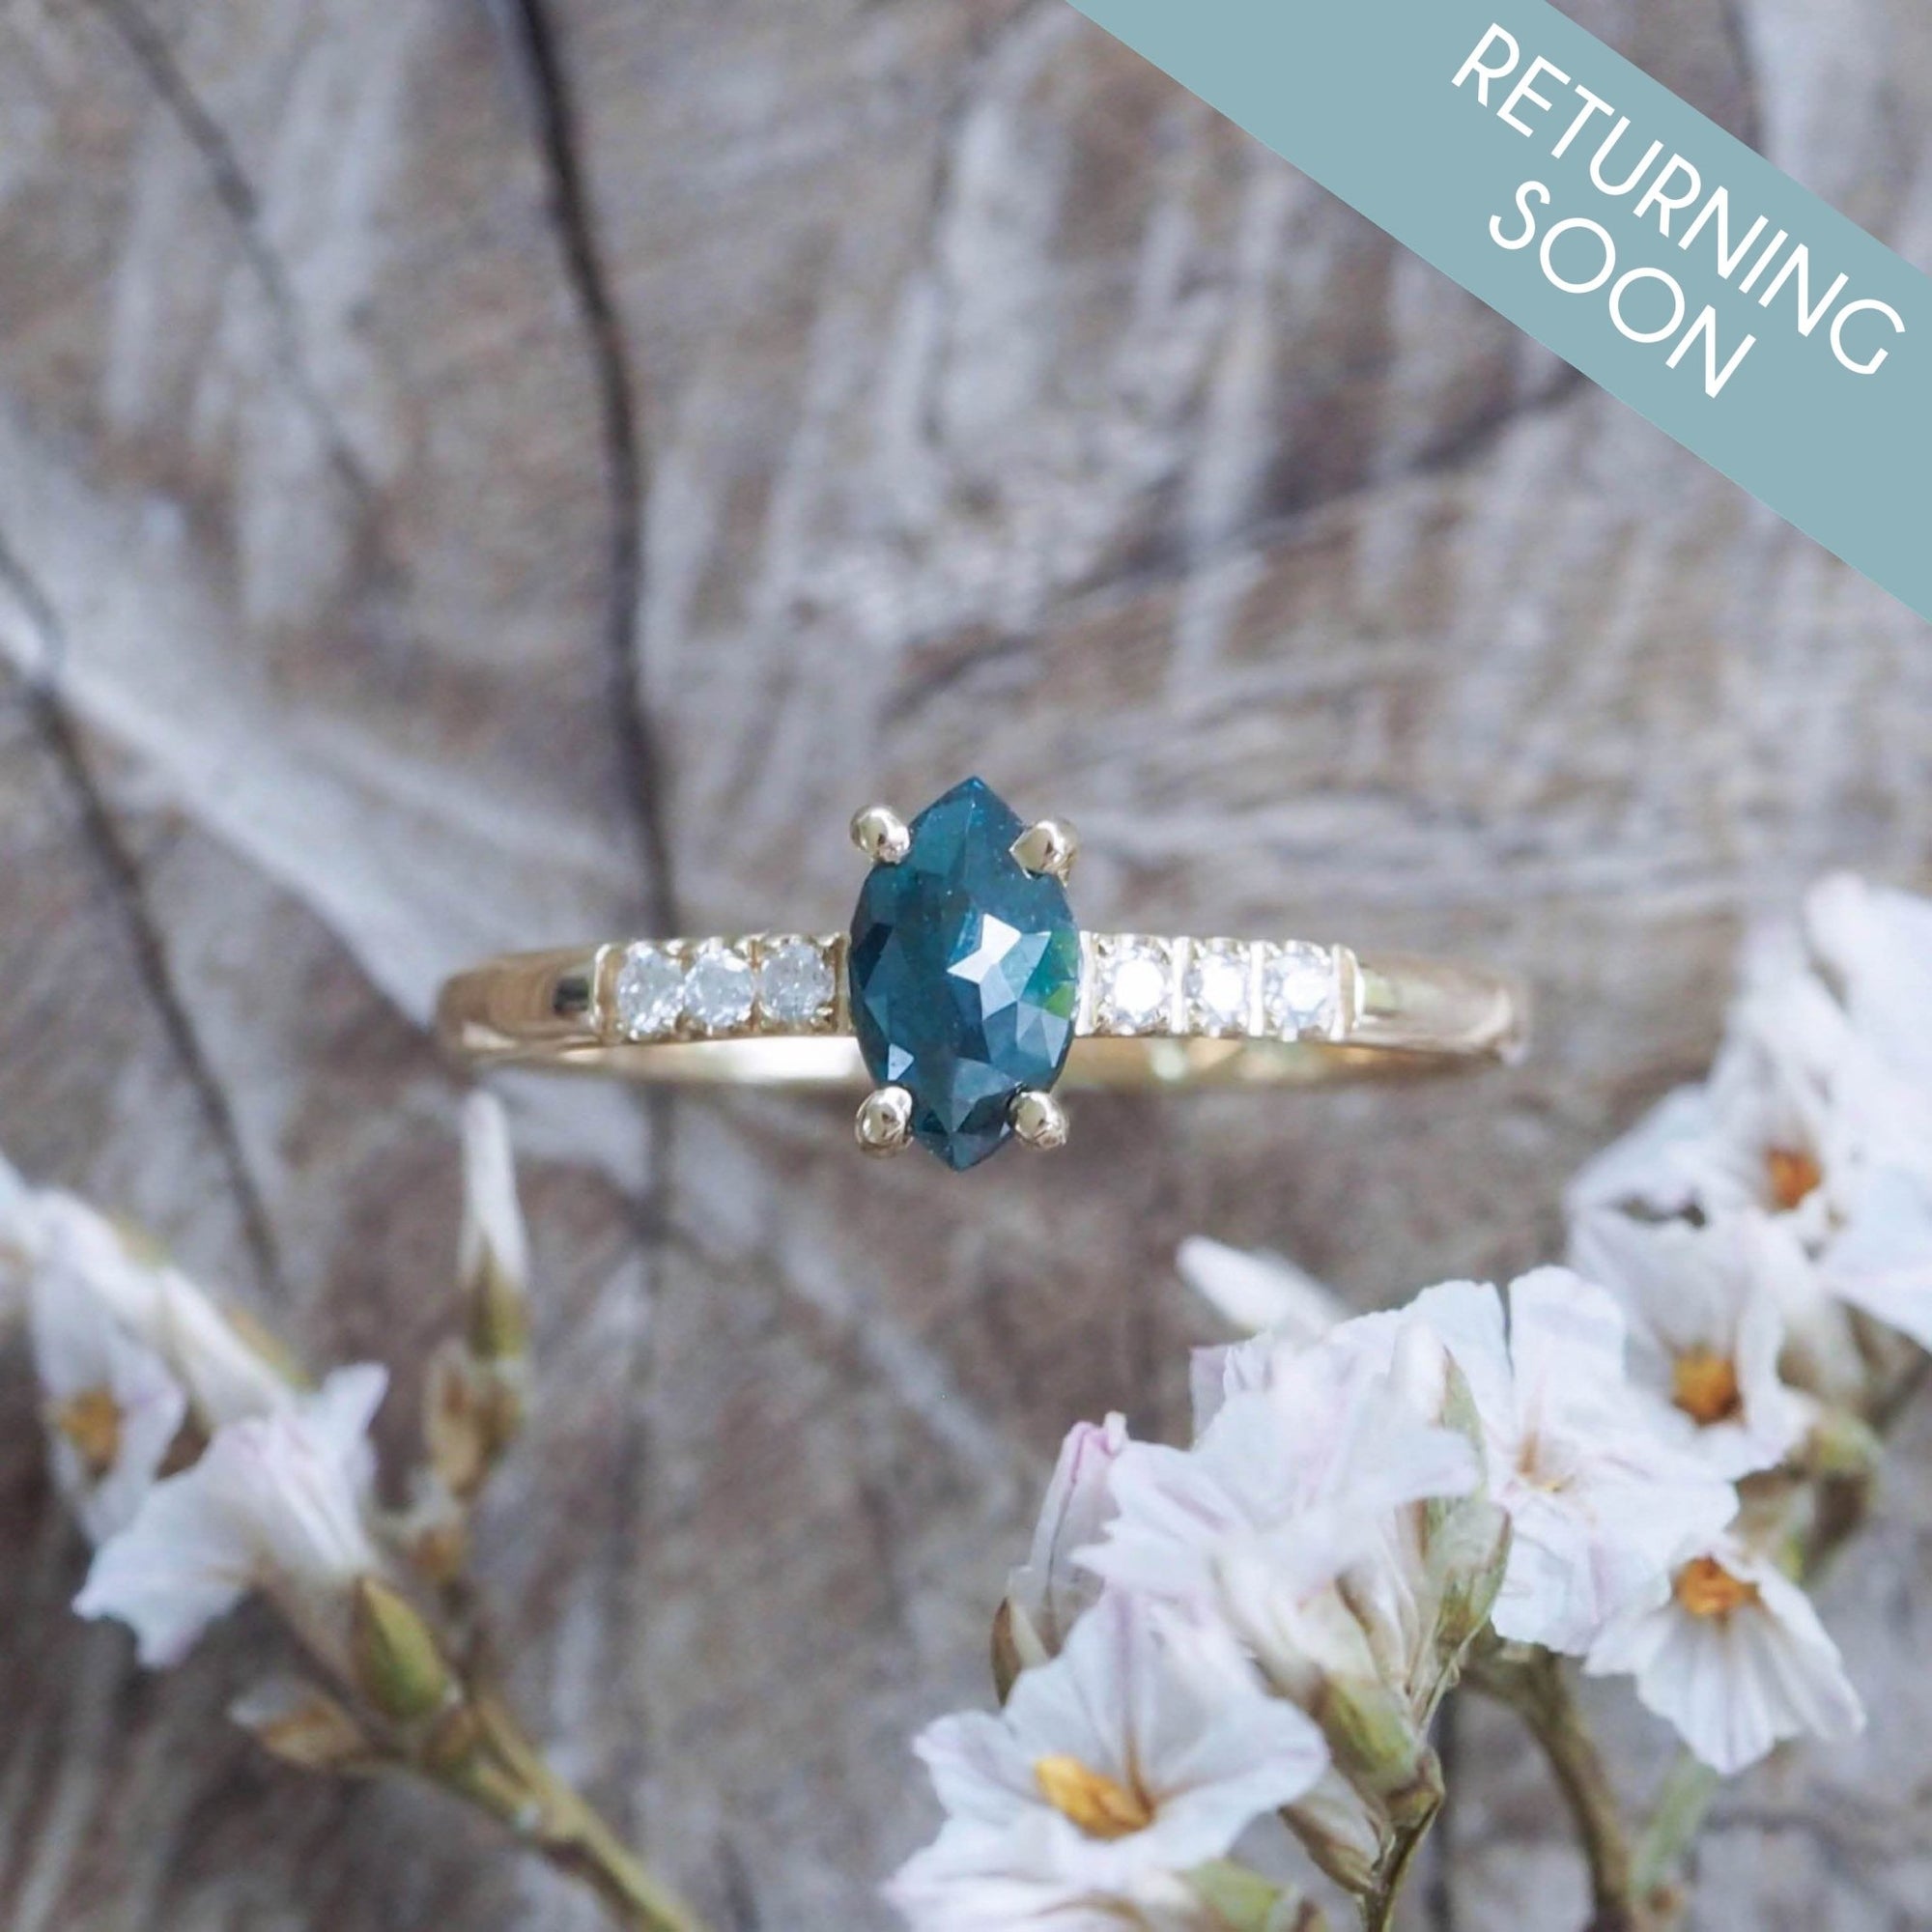 Custom Marquise Rose Cut Diamond Ring - Gardens of the Sun | Ethical Jewelry